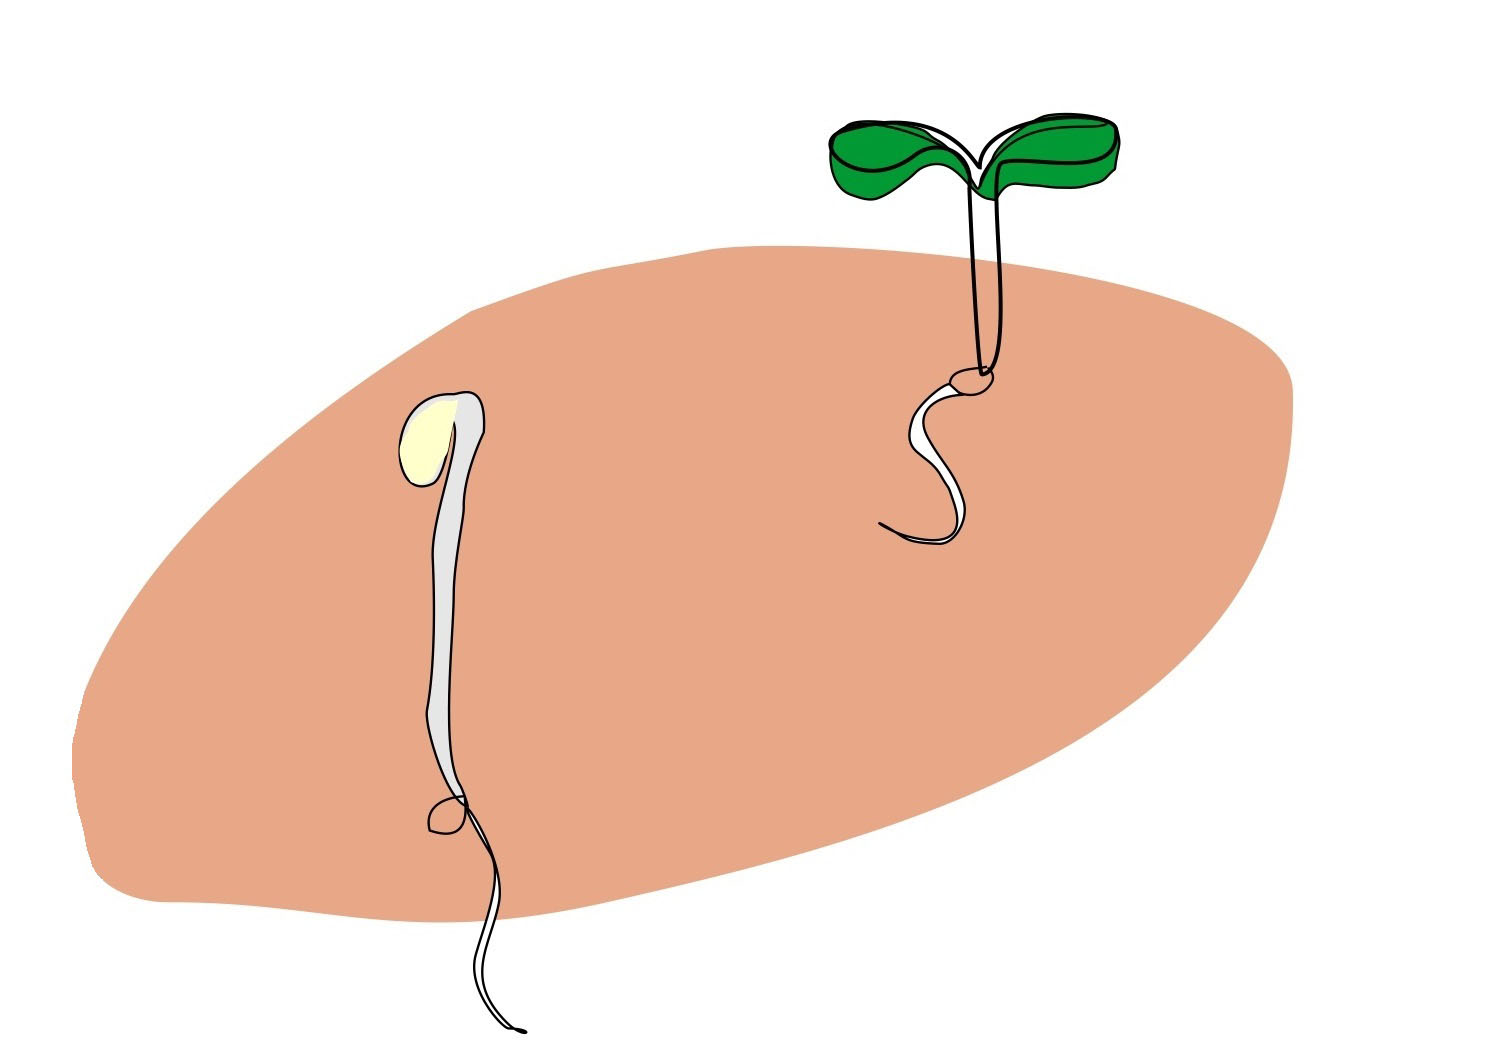 P-bodies prepare plants for growth in the light